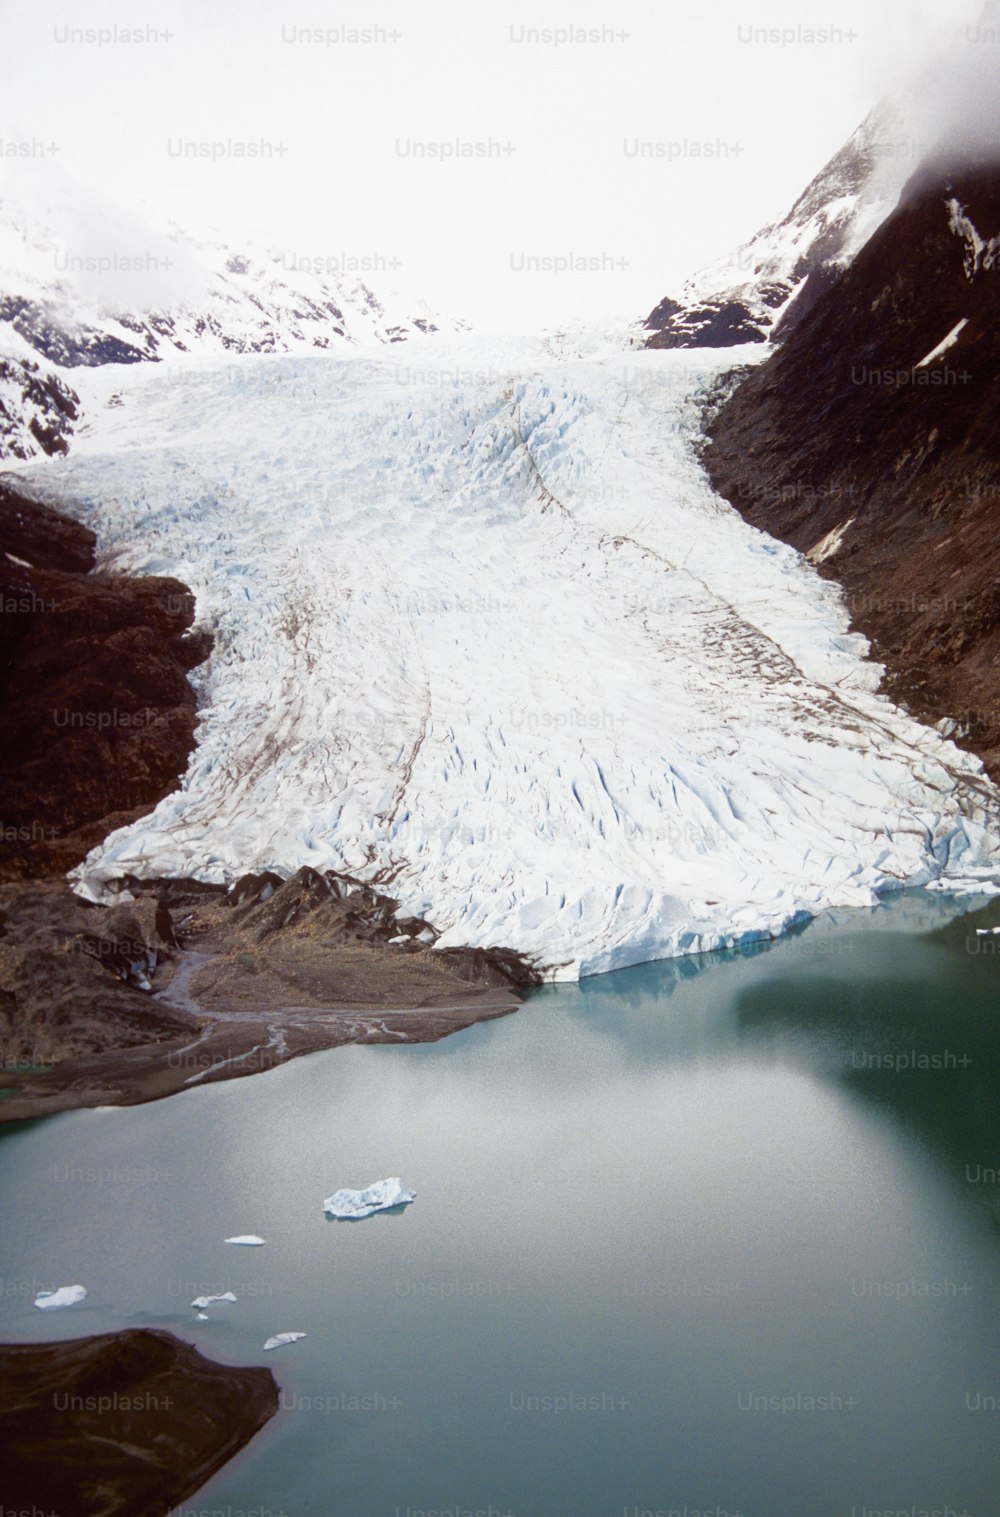 a large glacier on the side of a mountain